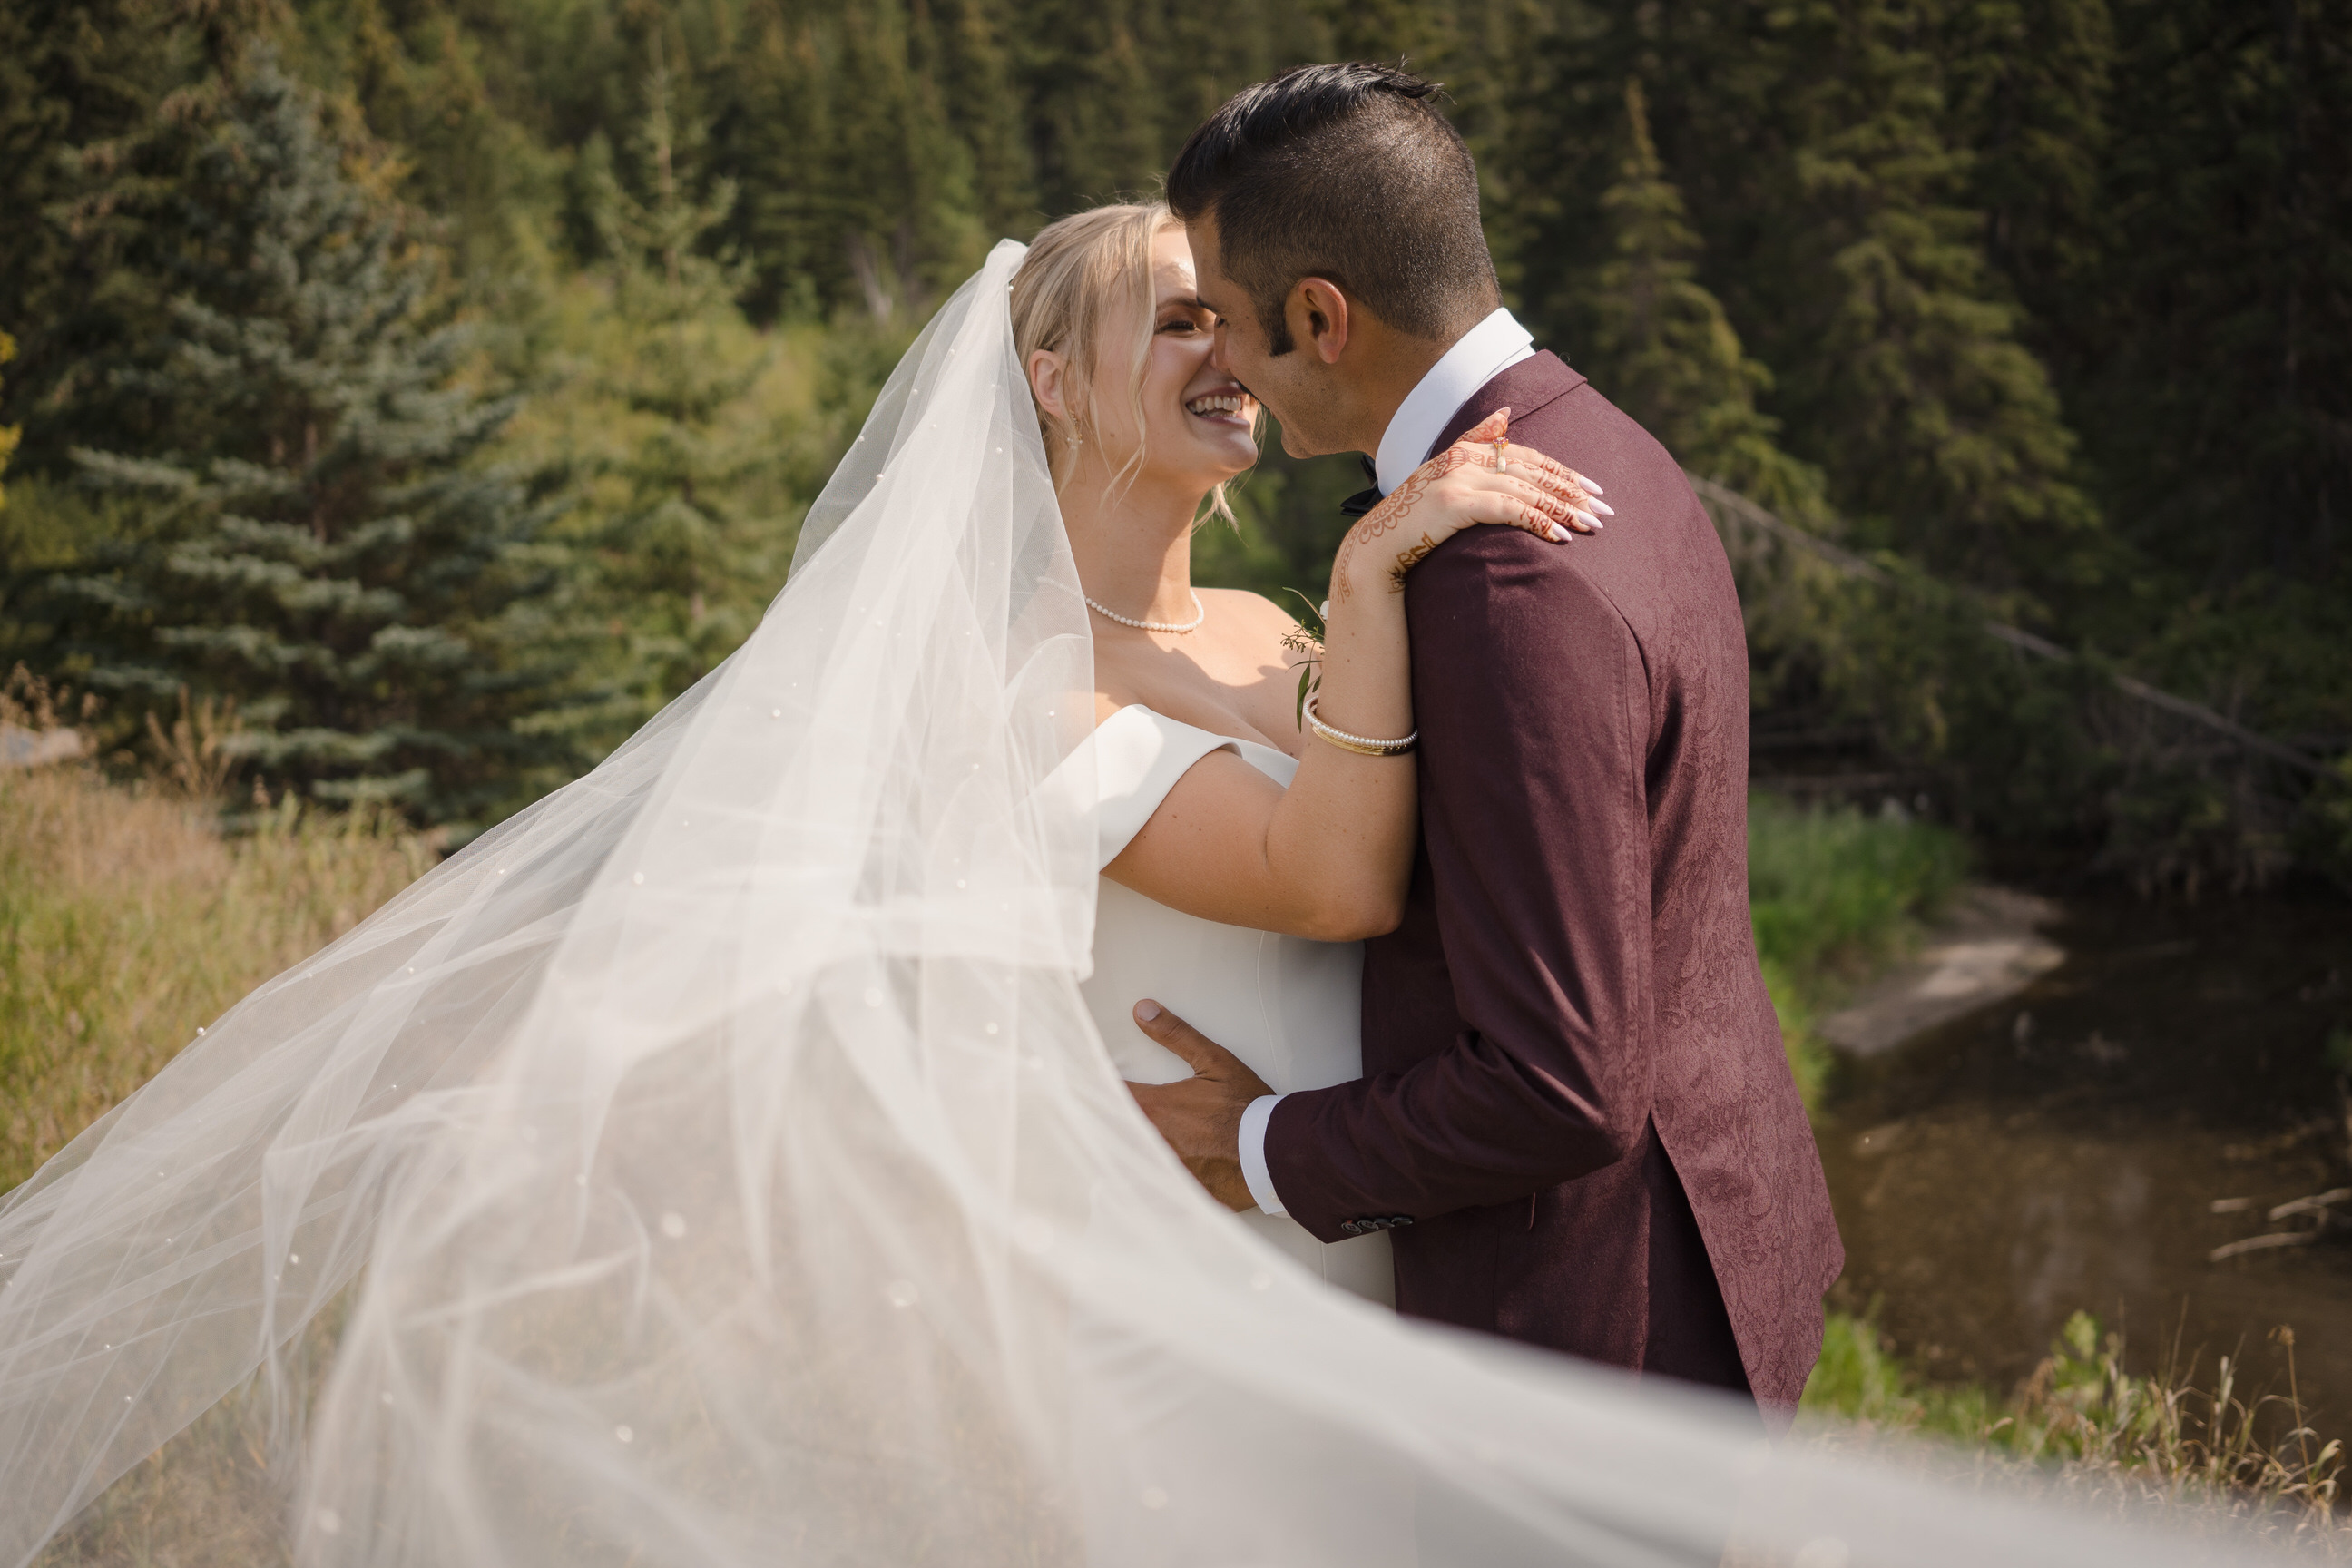 What can you expect when you hire a documentary style wedding photographer?